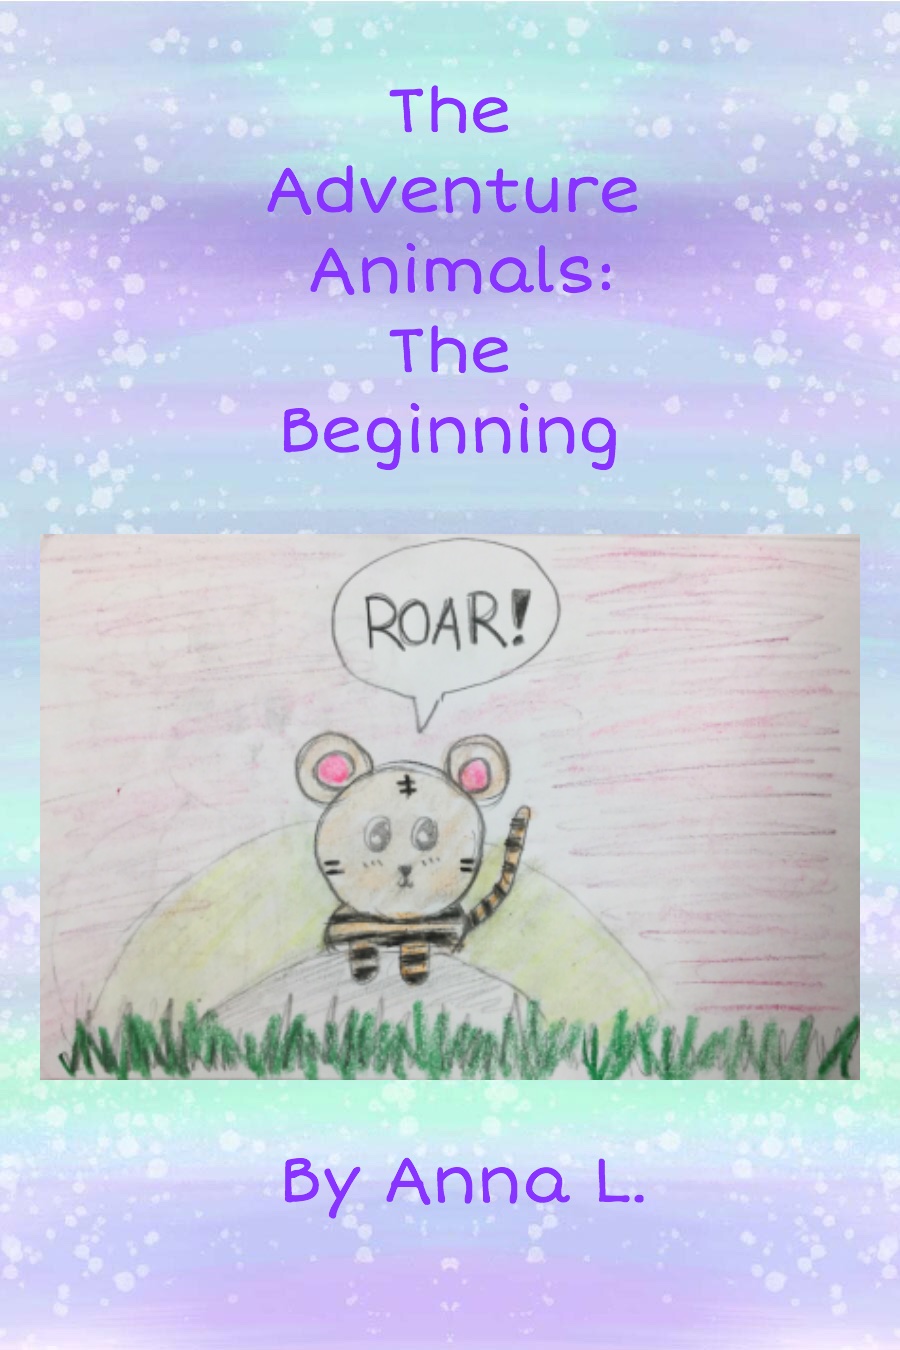 The Adventure Animals The Beginning by Anna L